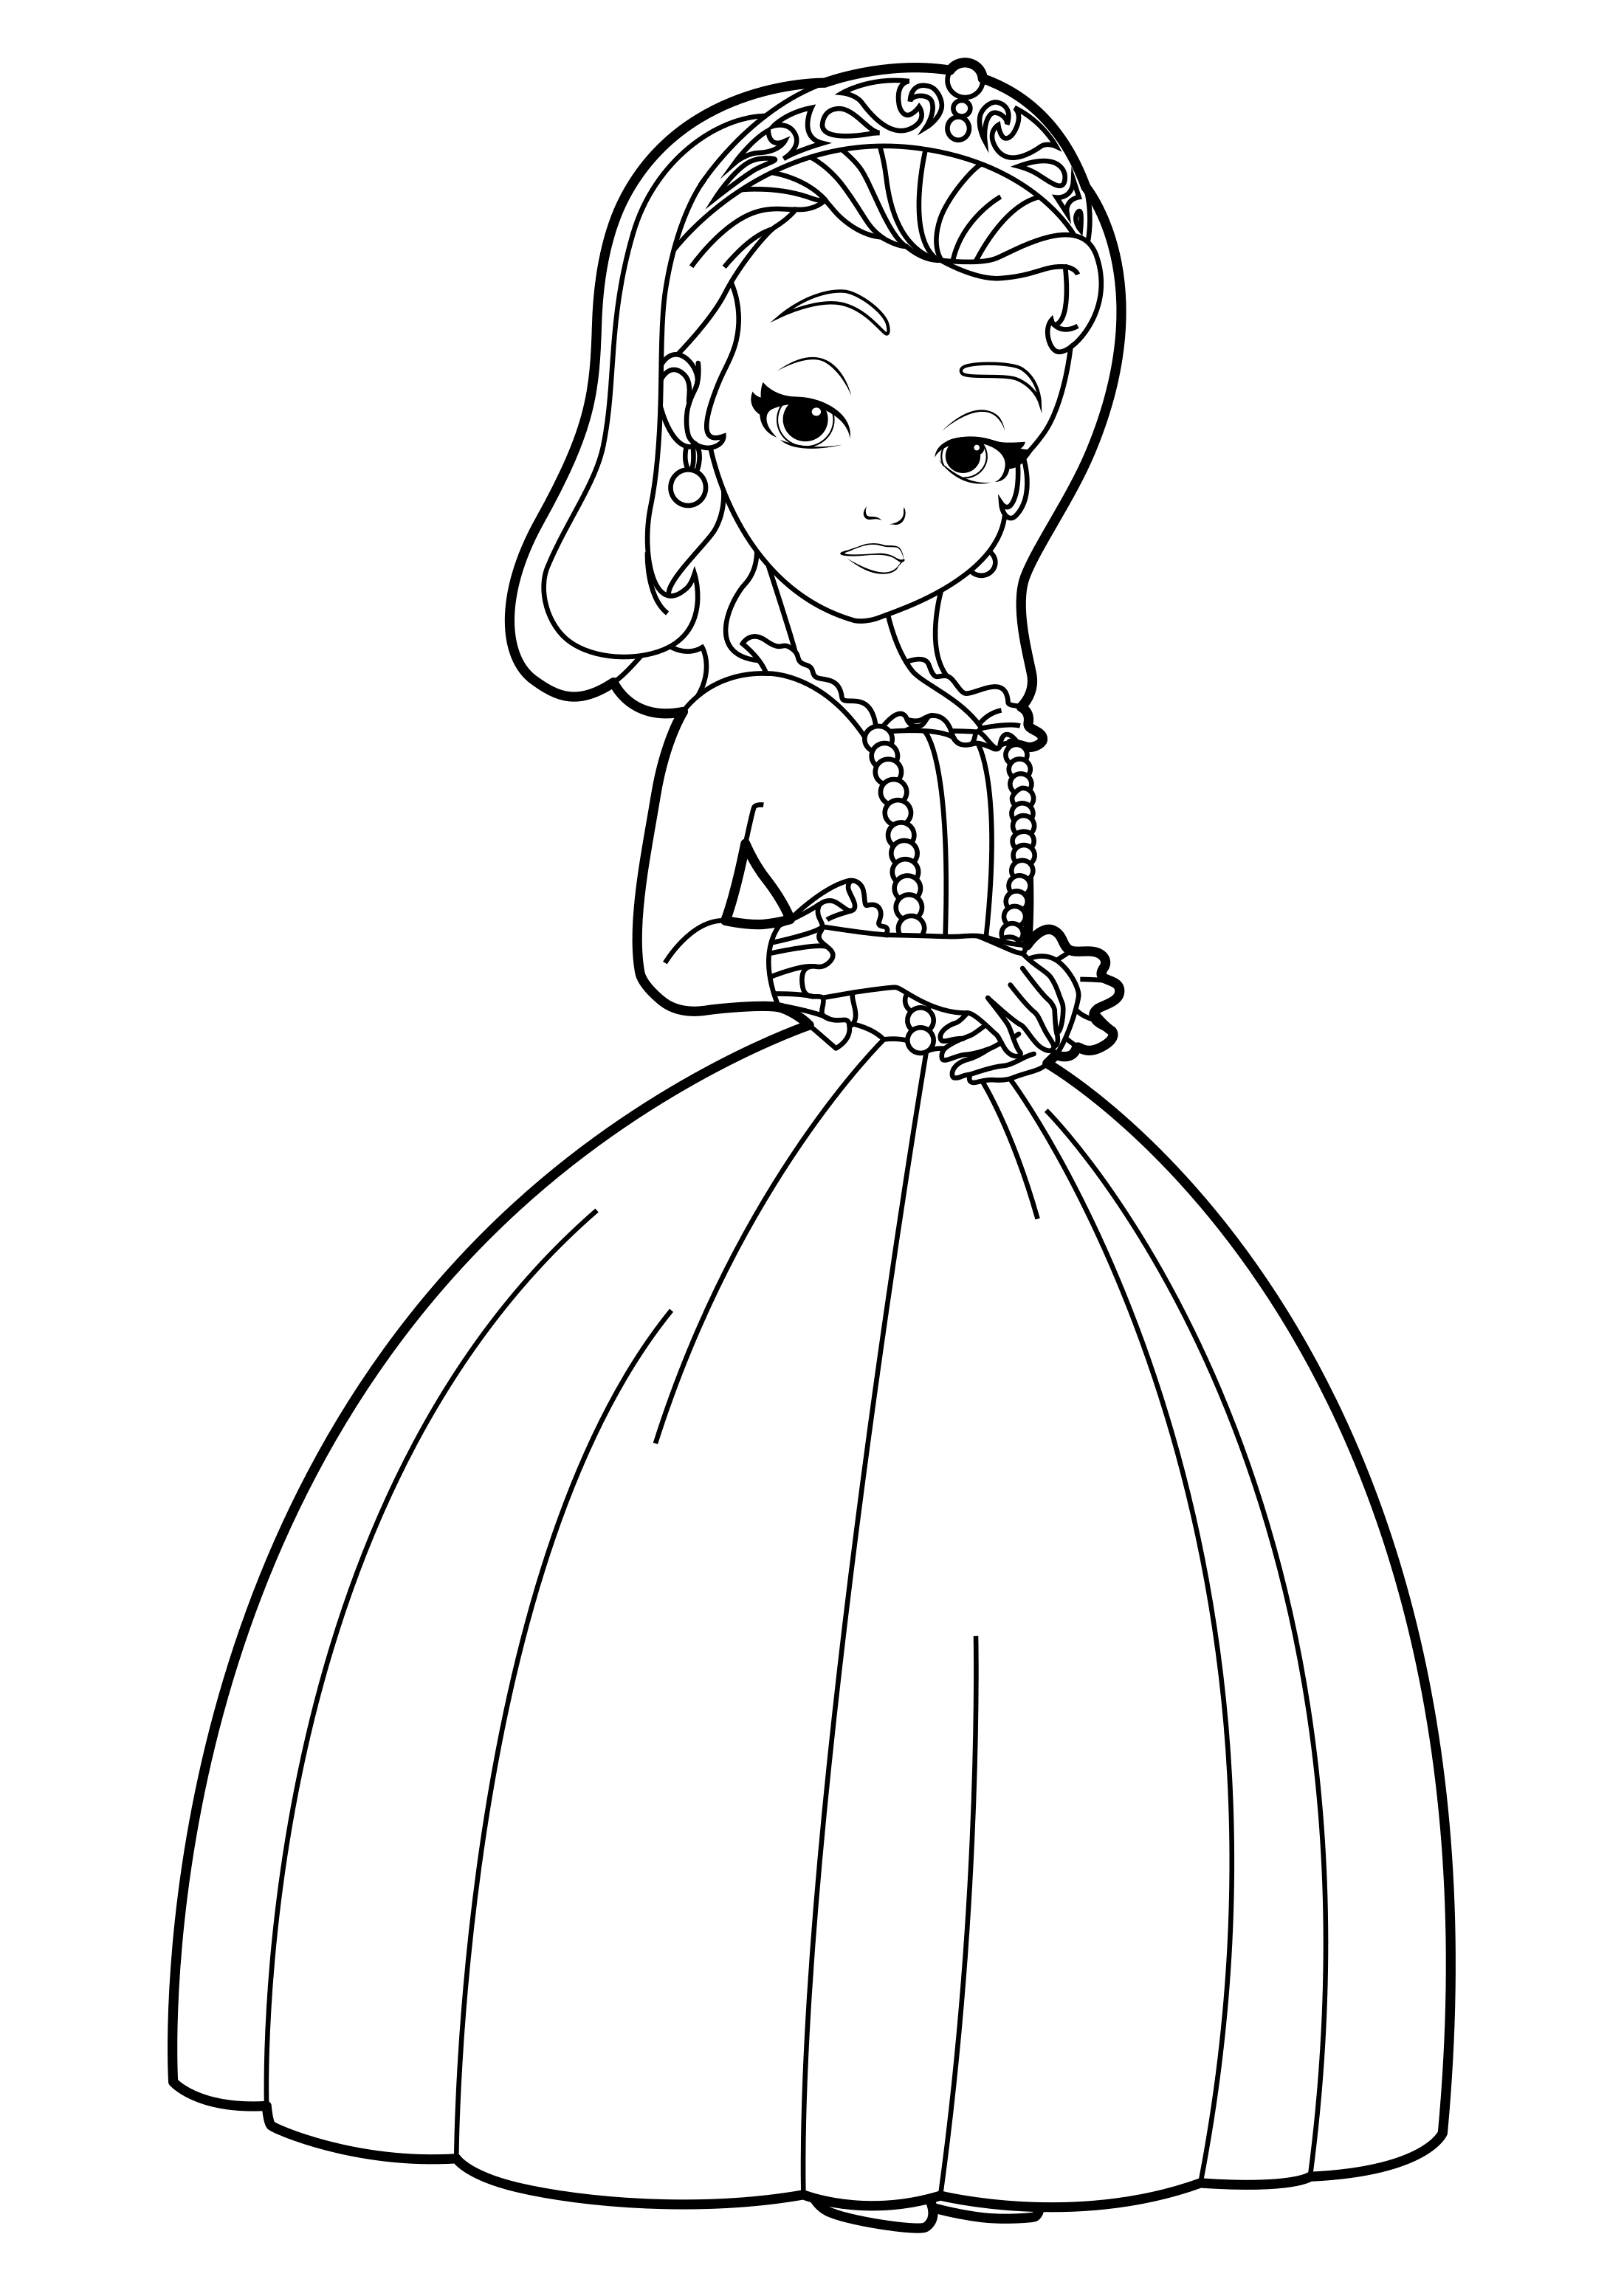 Coloring page Sofia the First Princess Amber